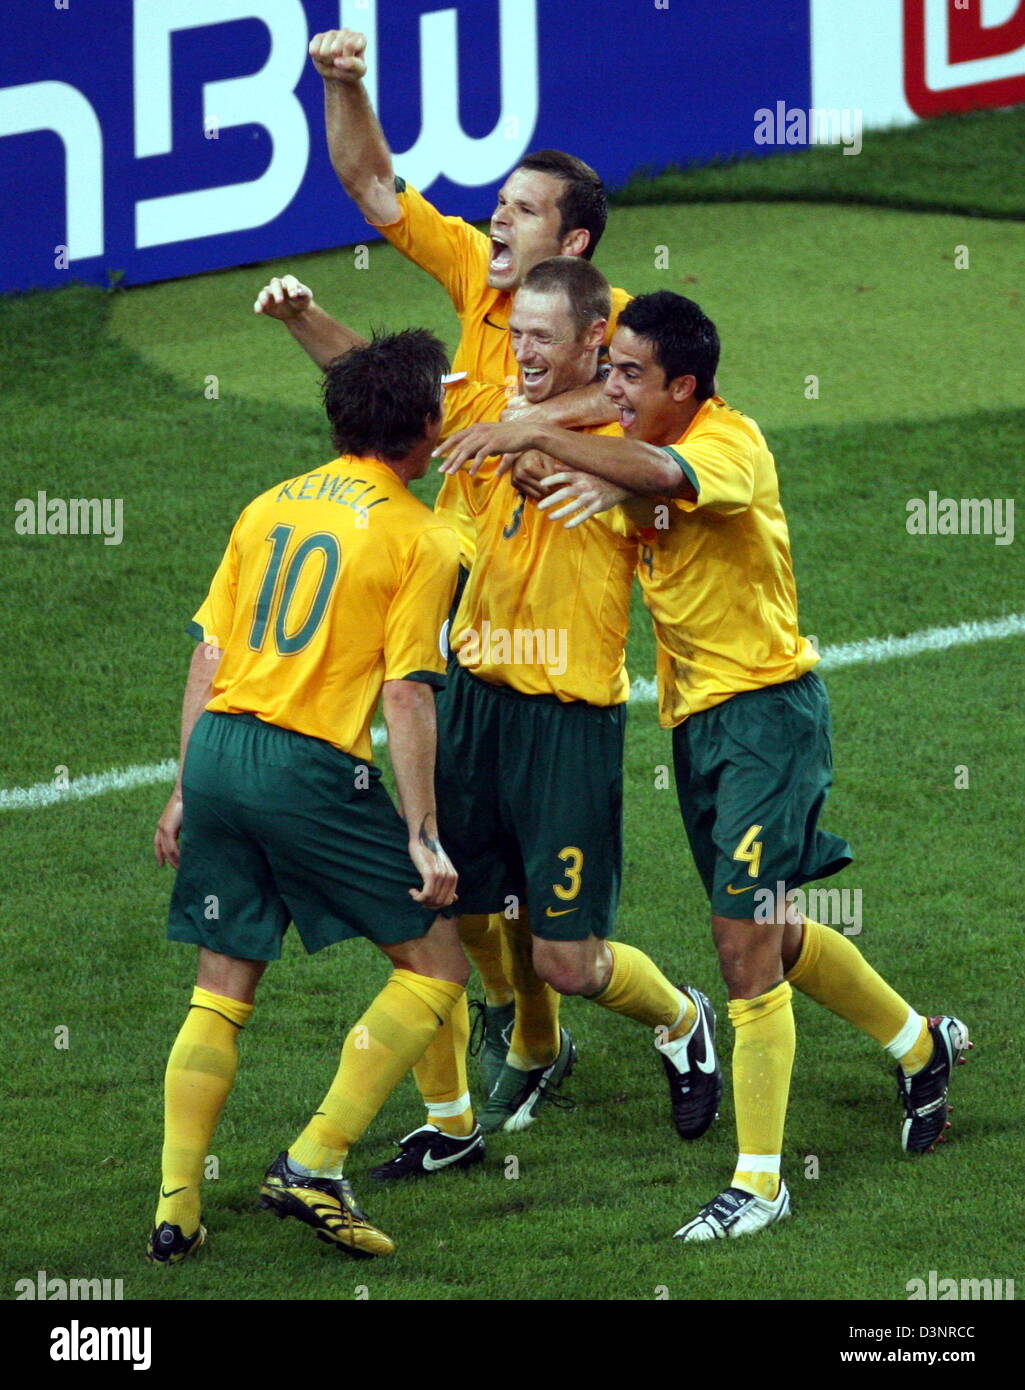 Harry Kewell (L-R), Craig Moore, Mark Viduka and Tim Cahill of Australia celebrate Moore's  1-1 draw against Croatia during the group F match of 2006 FIFA World Cup between Croatia and Australia in Stuttgart, Germany, Thursday 22 June 2006. DPA/ULI DECK+++ Mobile Services OUT +++ Please refer to FIFA's terms and conditions Stock Photo